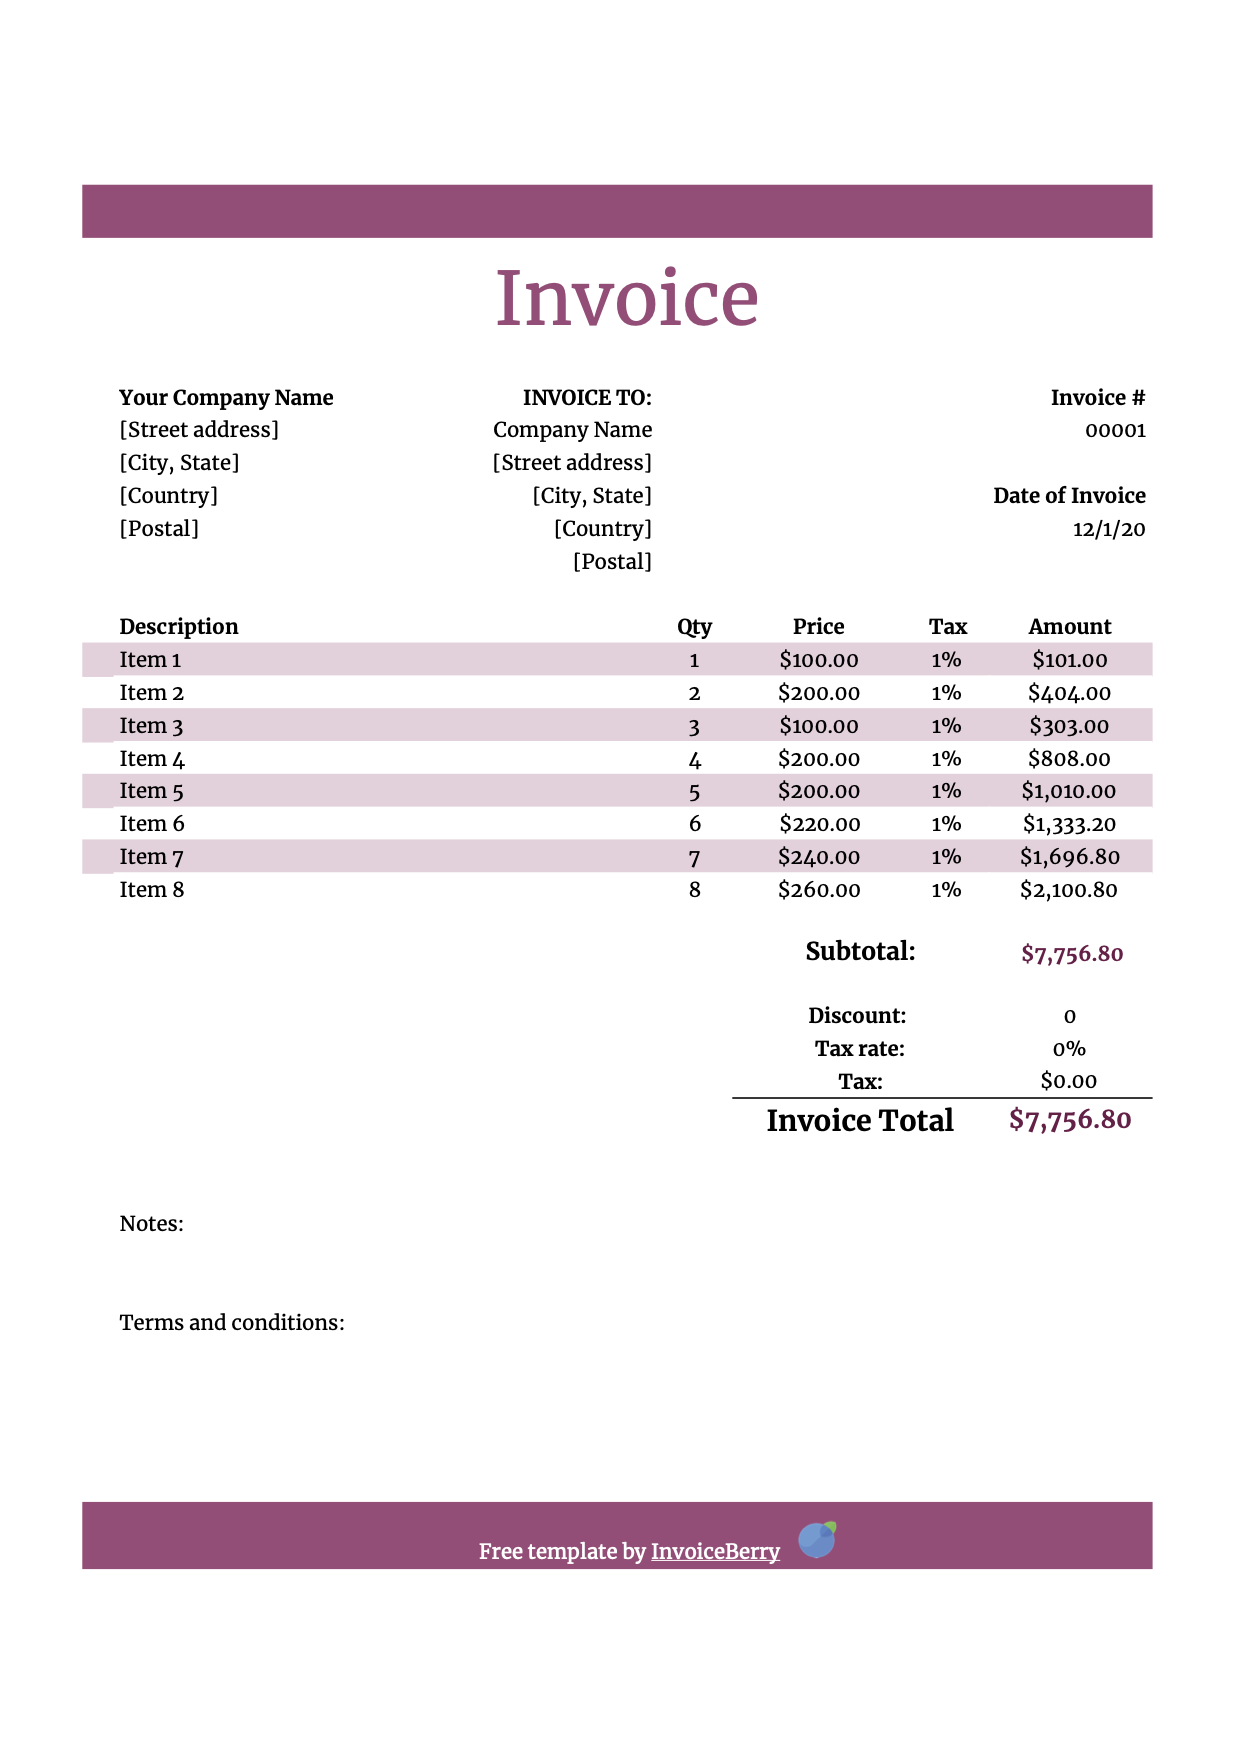 Free Numbers invoice templates - get invoice templates for Mac Pertaining To Invoice Template For Iphone